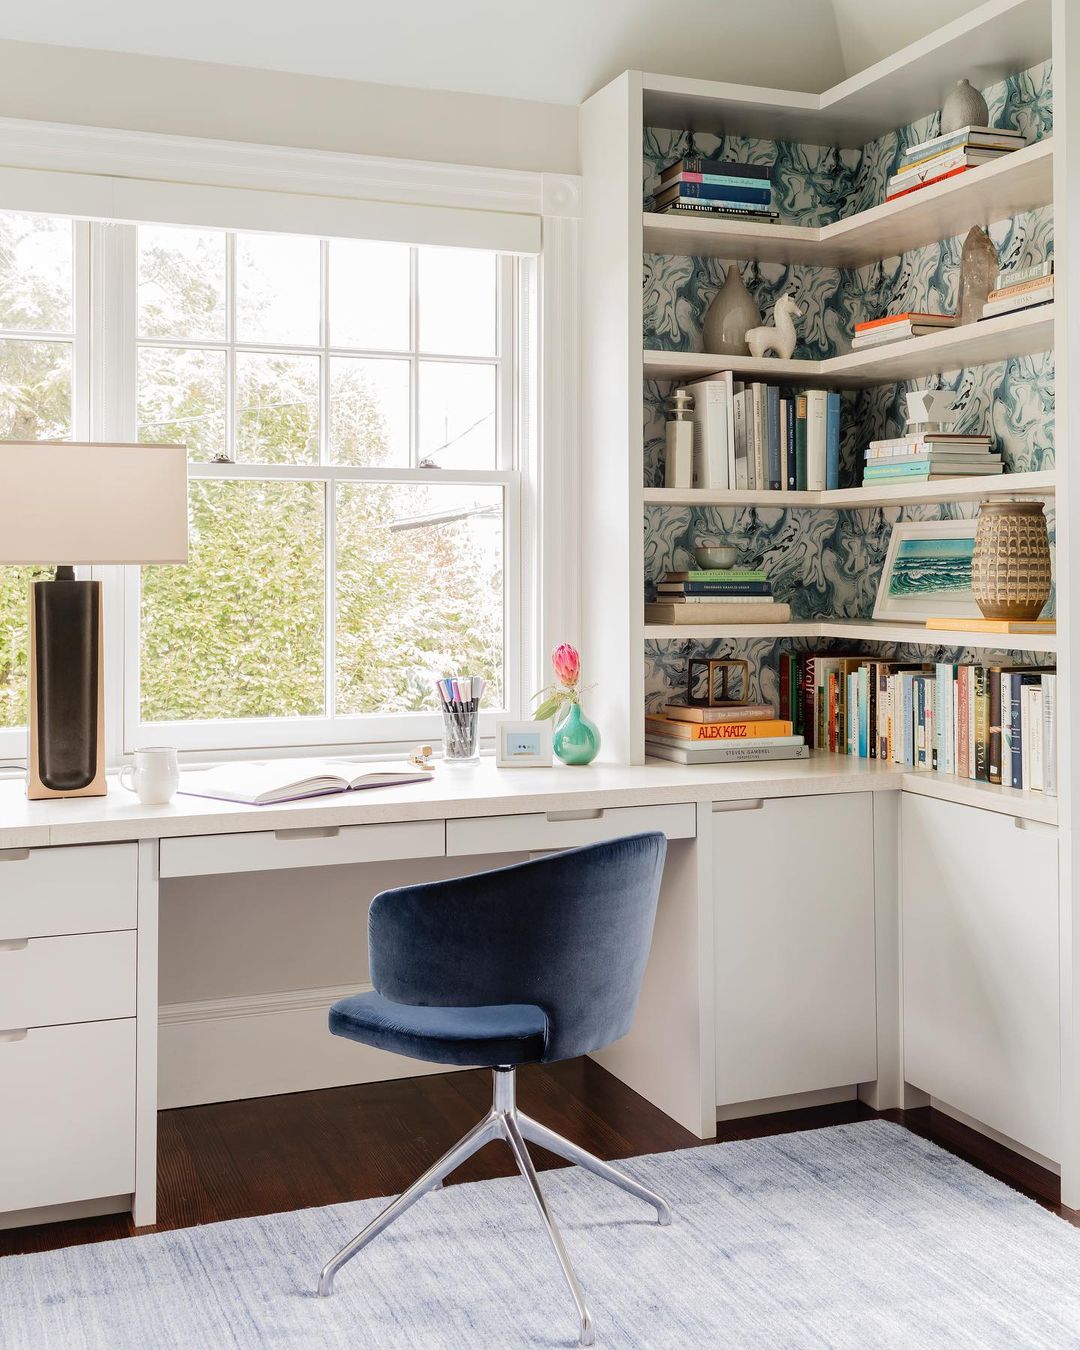 A home office with large windows and floor to ceiling shelving. Photo by Instagram user @deeelms